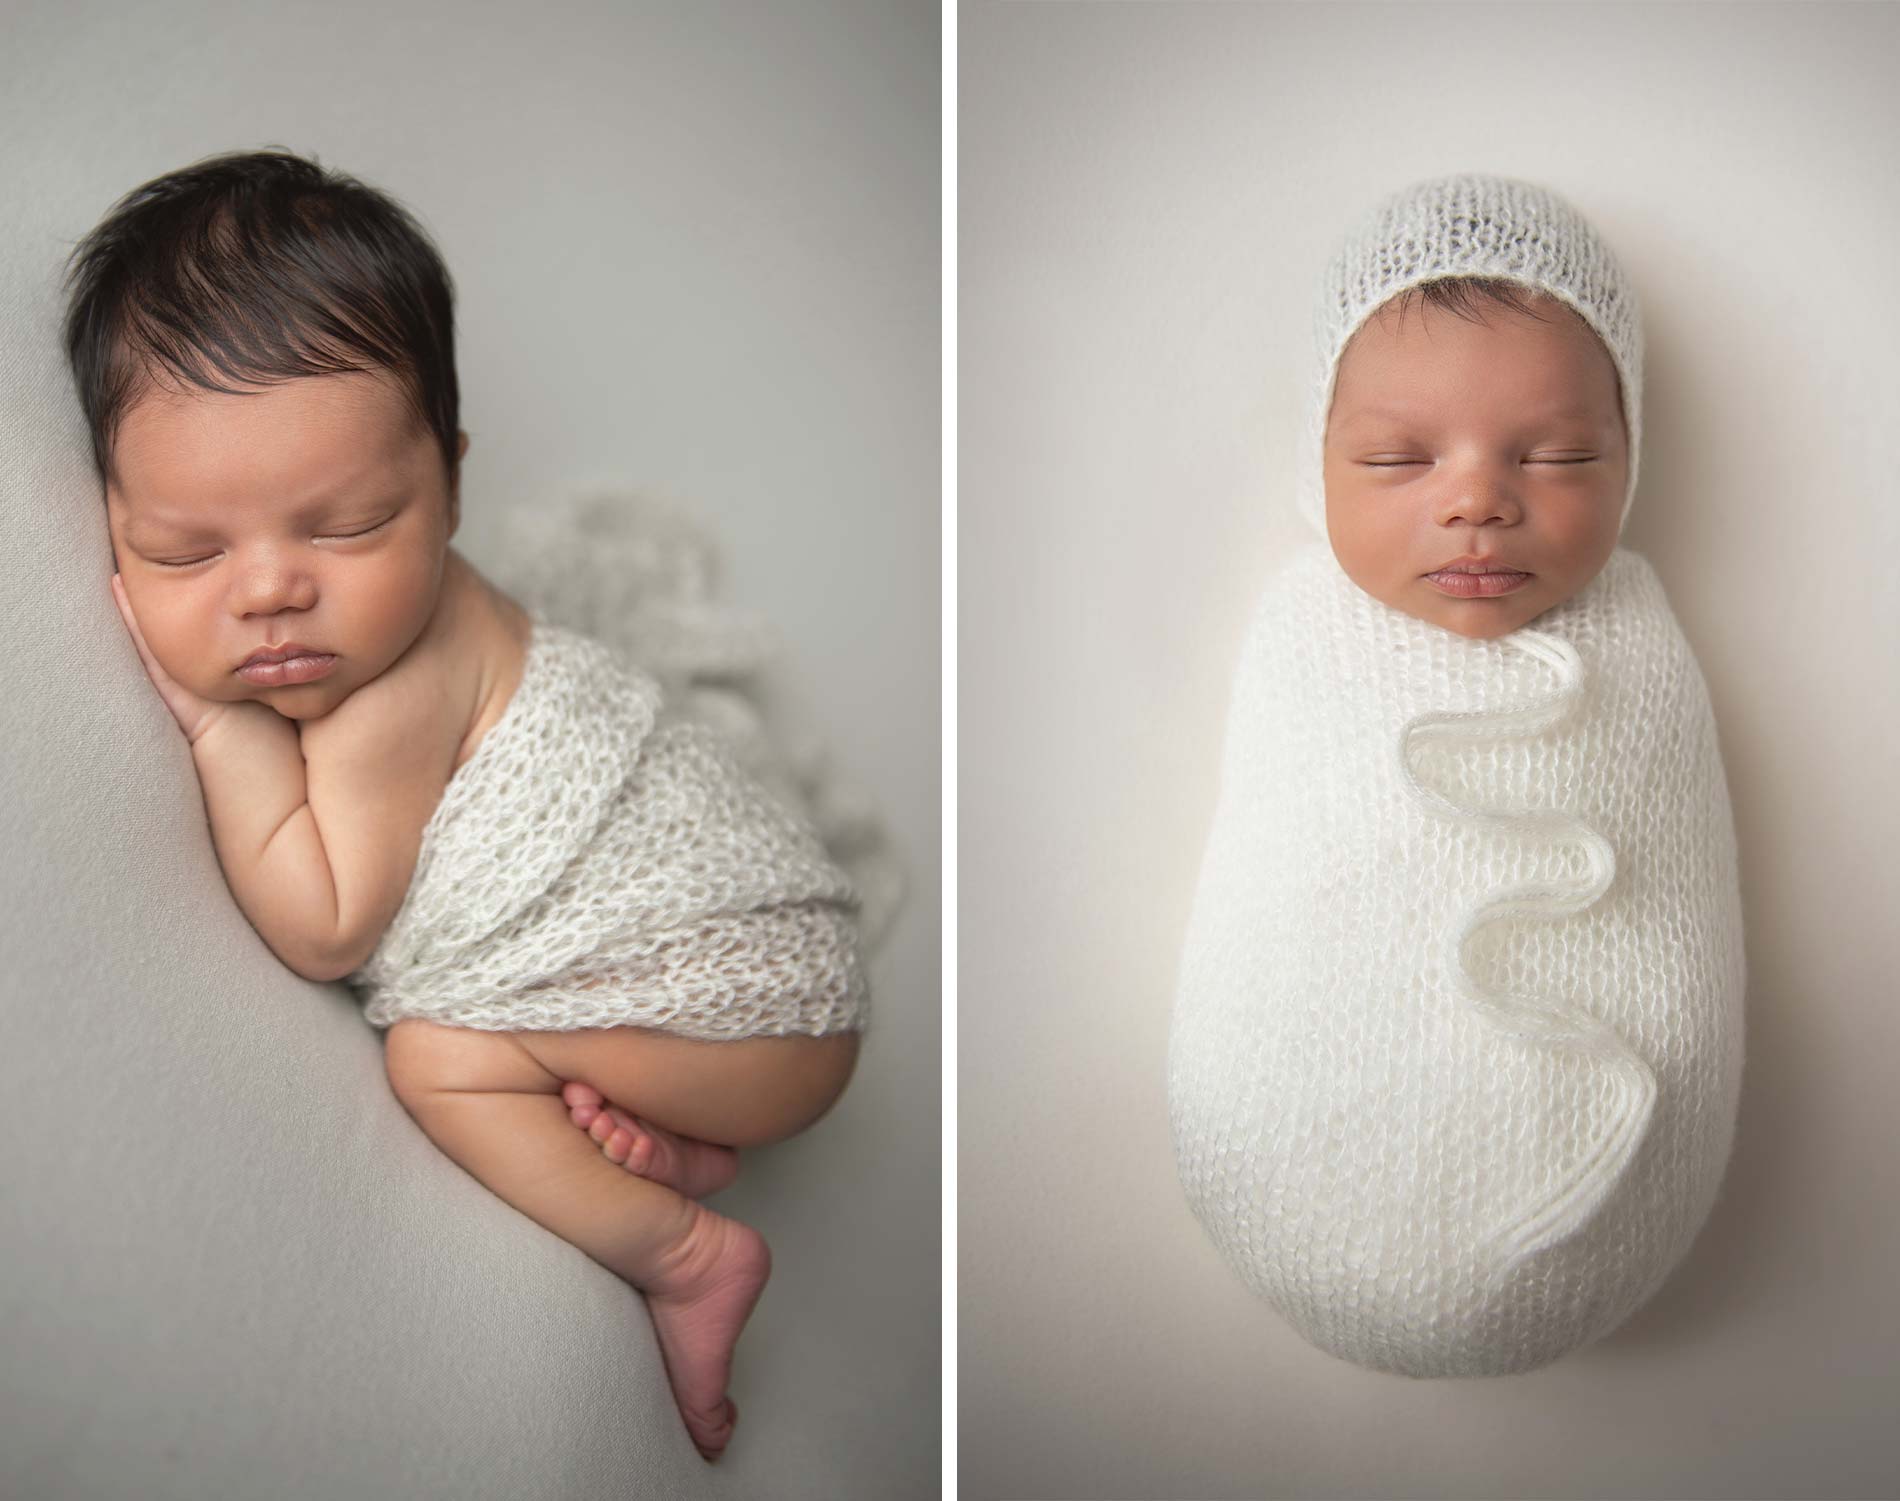 newborn wrapped in different styles of white blanket